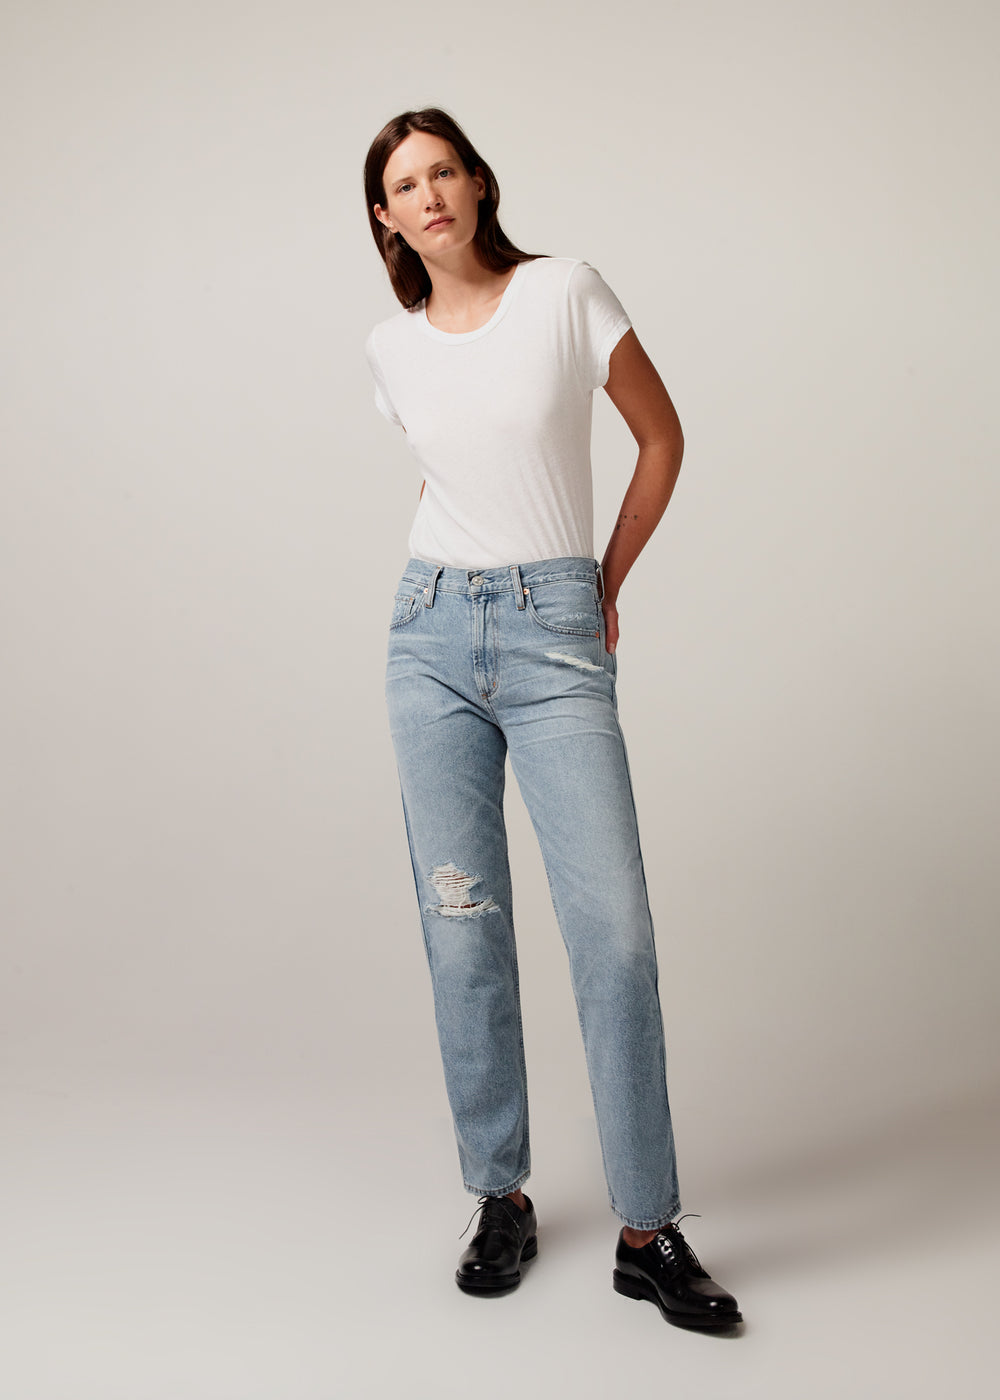 Women's Denim Guide 2.0 – Citizens of Humanity